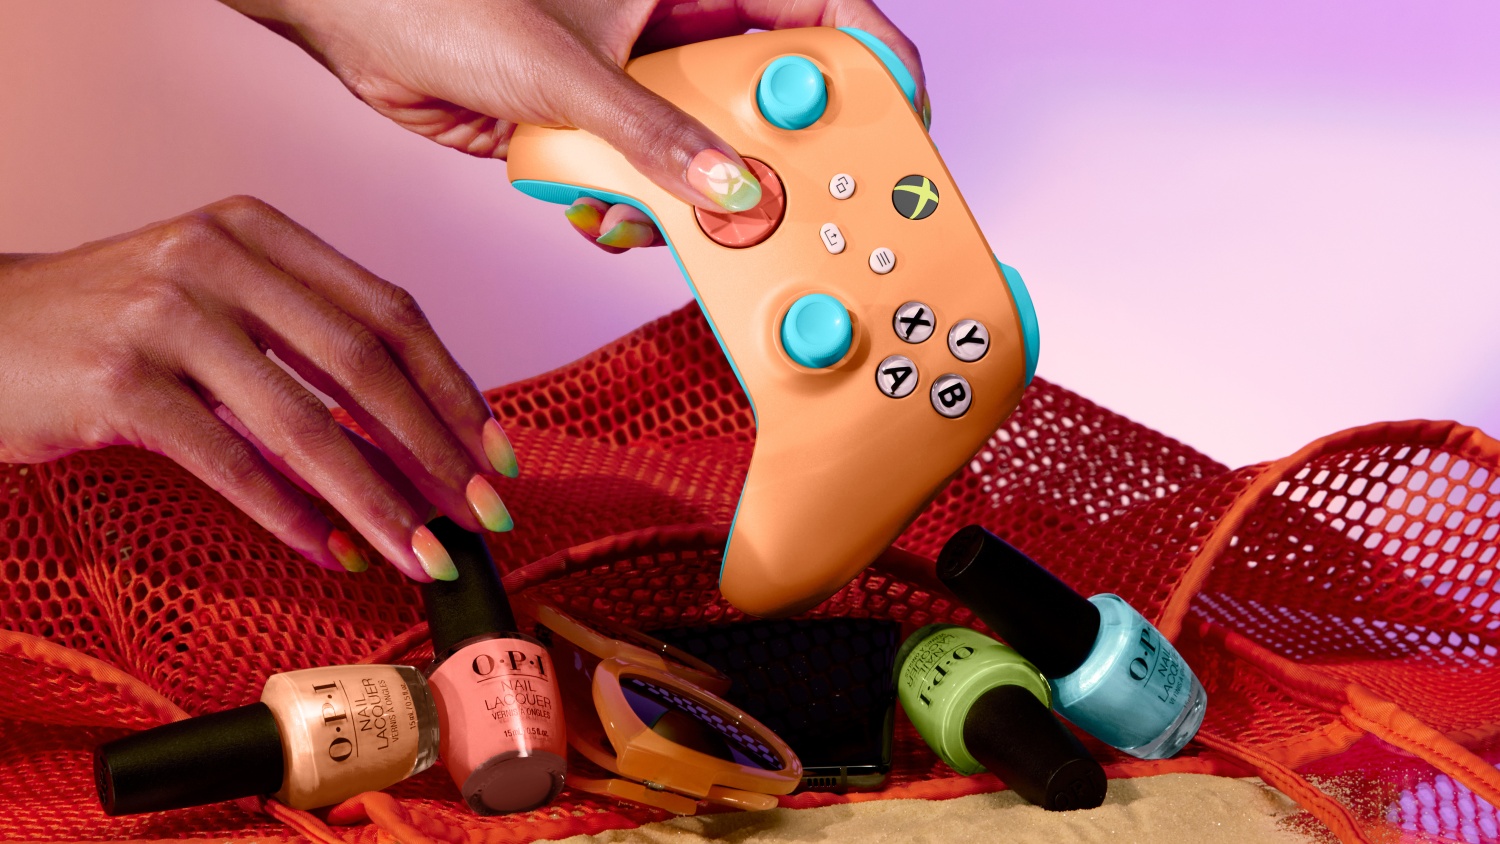 OPI And Xbox Turn Up the Heat With A New Summer Collection